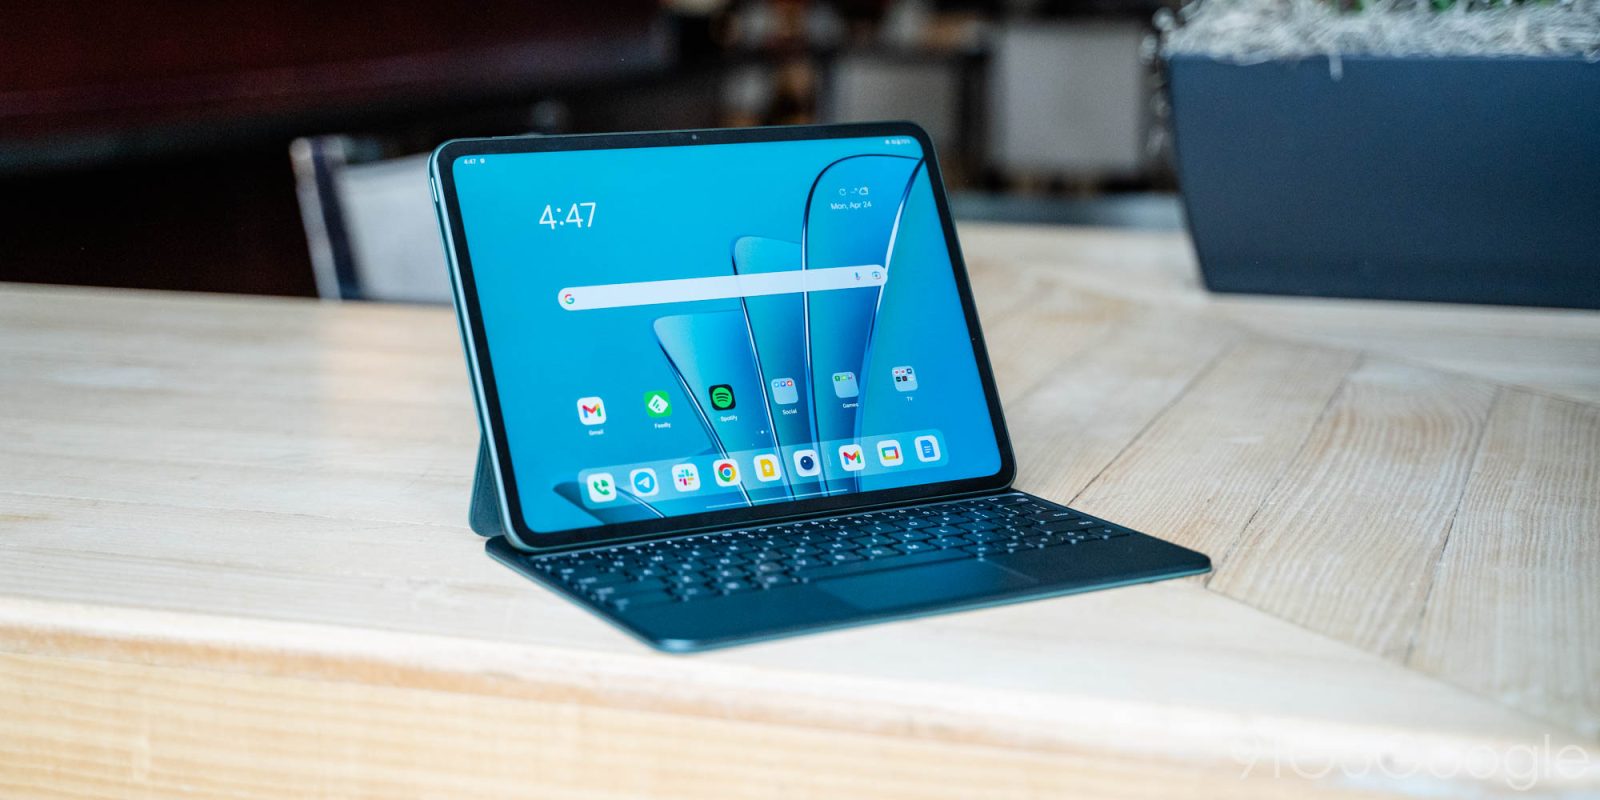 Galaxy Tab S7 gets its Android 12L update - 9to5Google